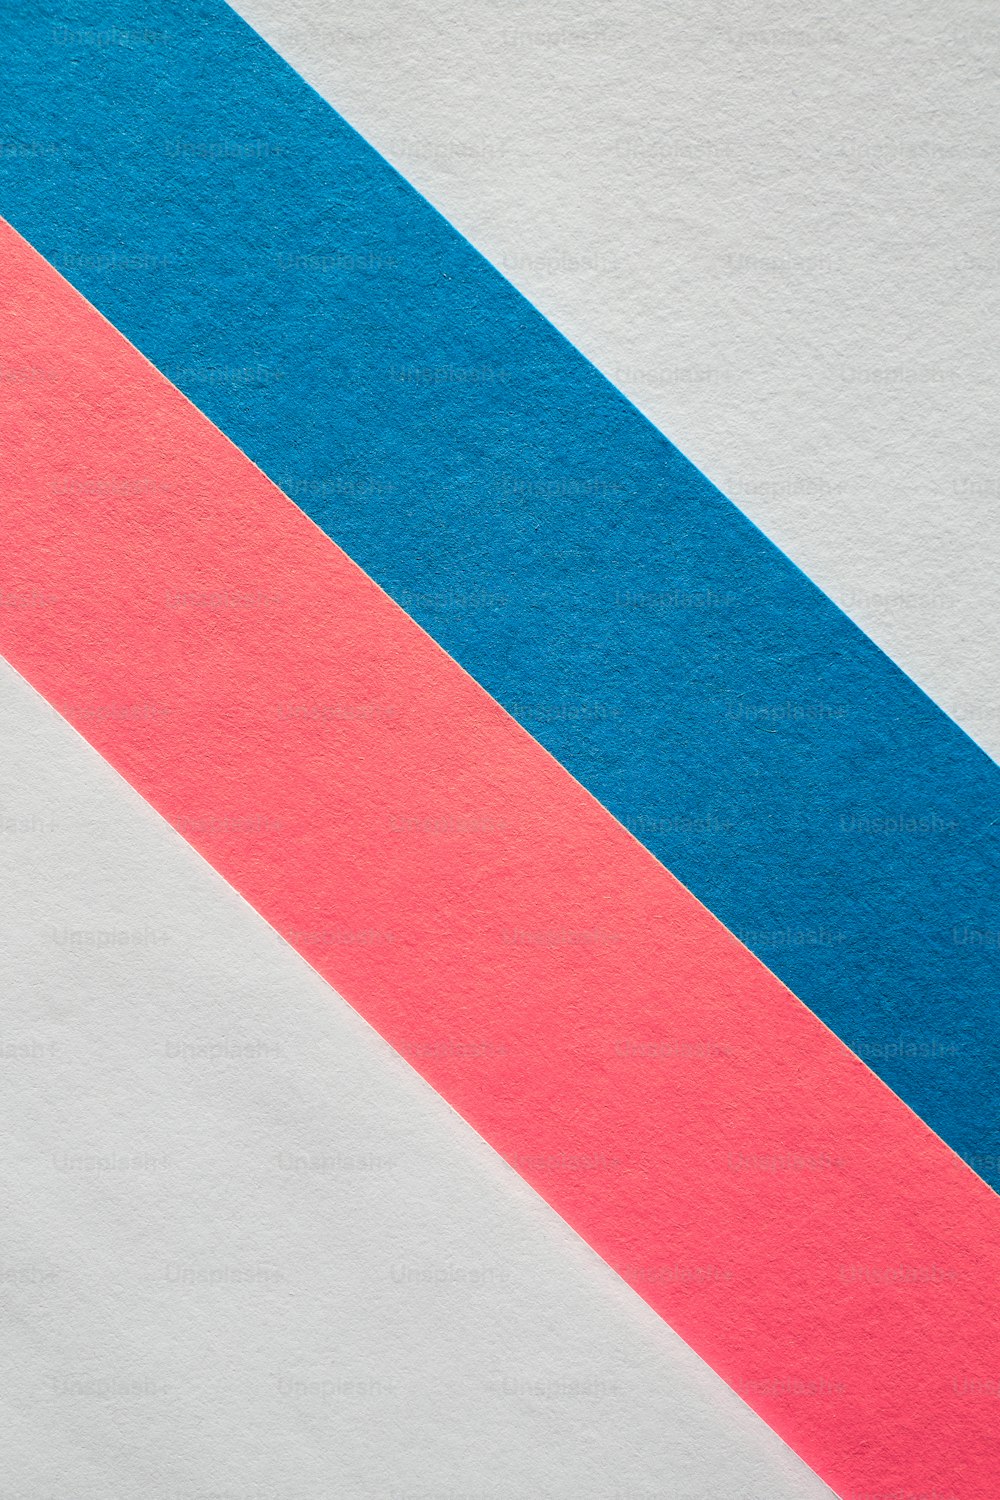 a red, white, and blue strip of paper